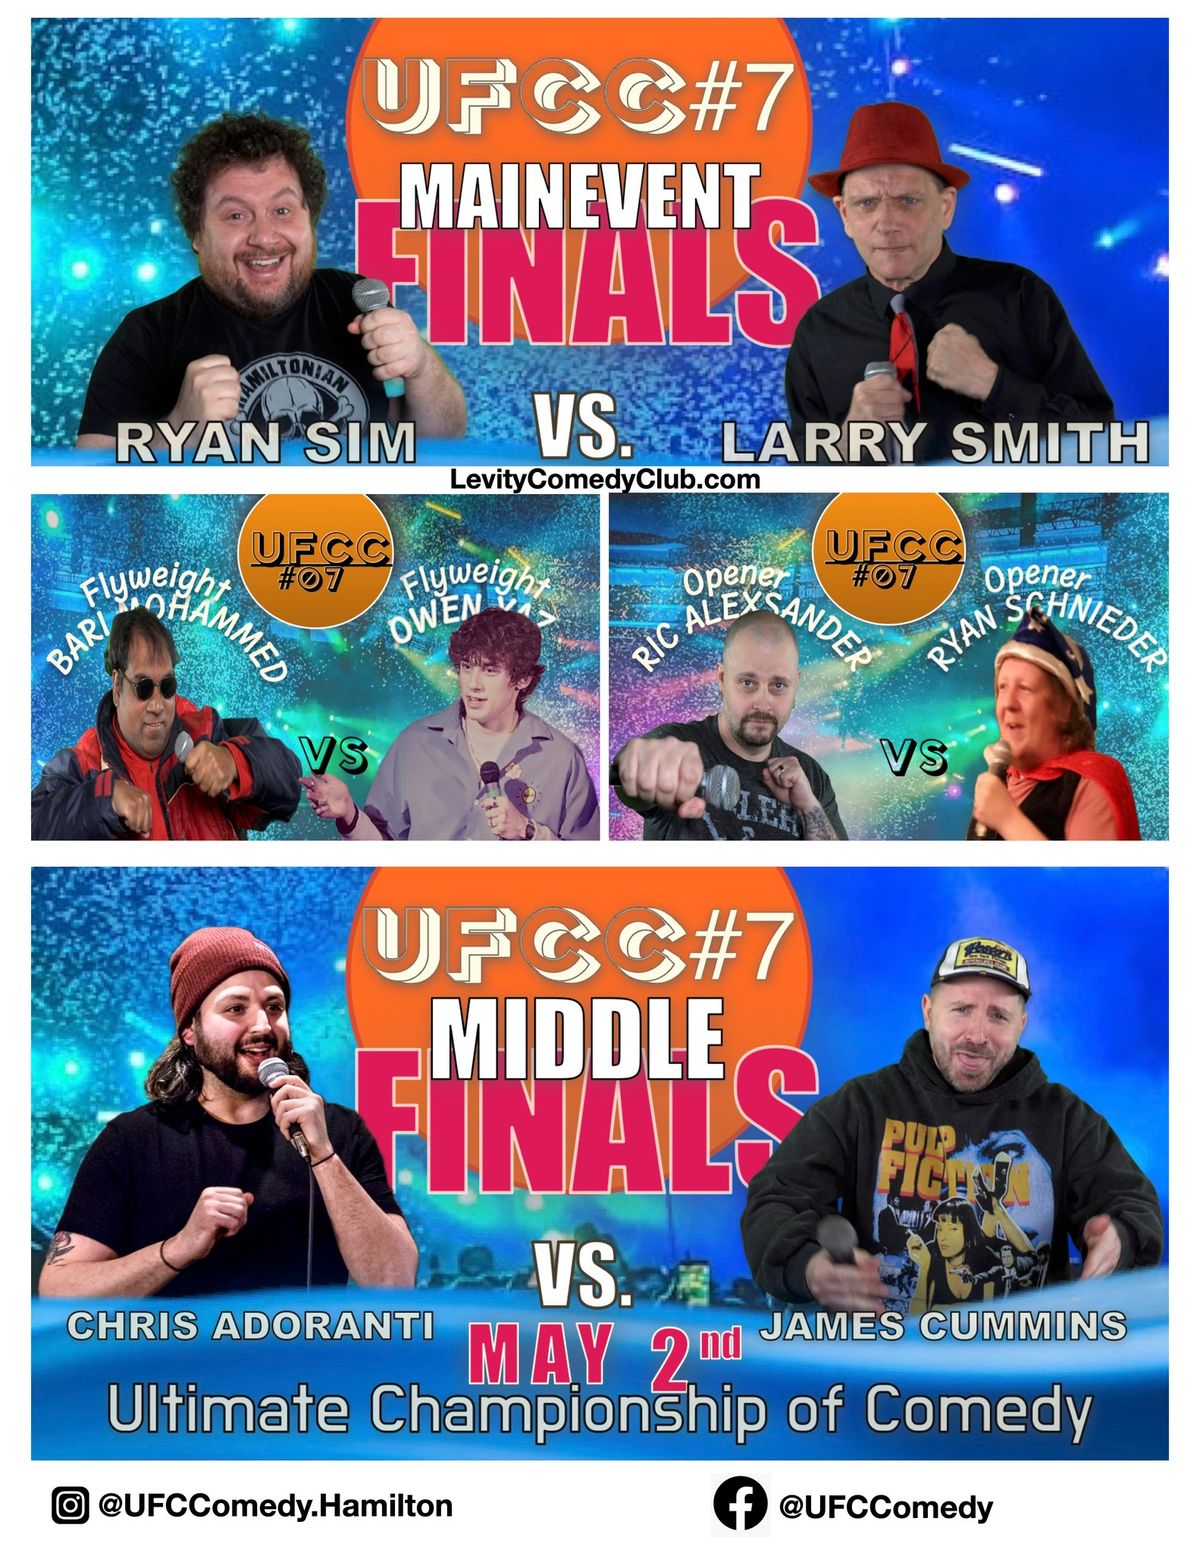 Ultimate Championship of Comedy FINALS May 2nd